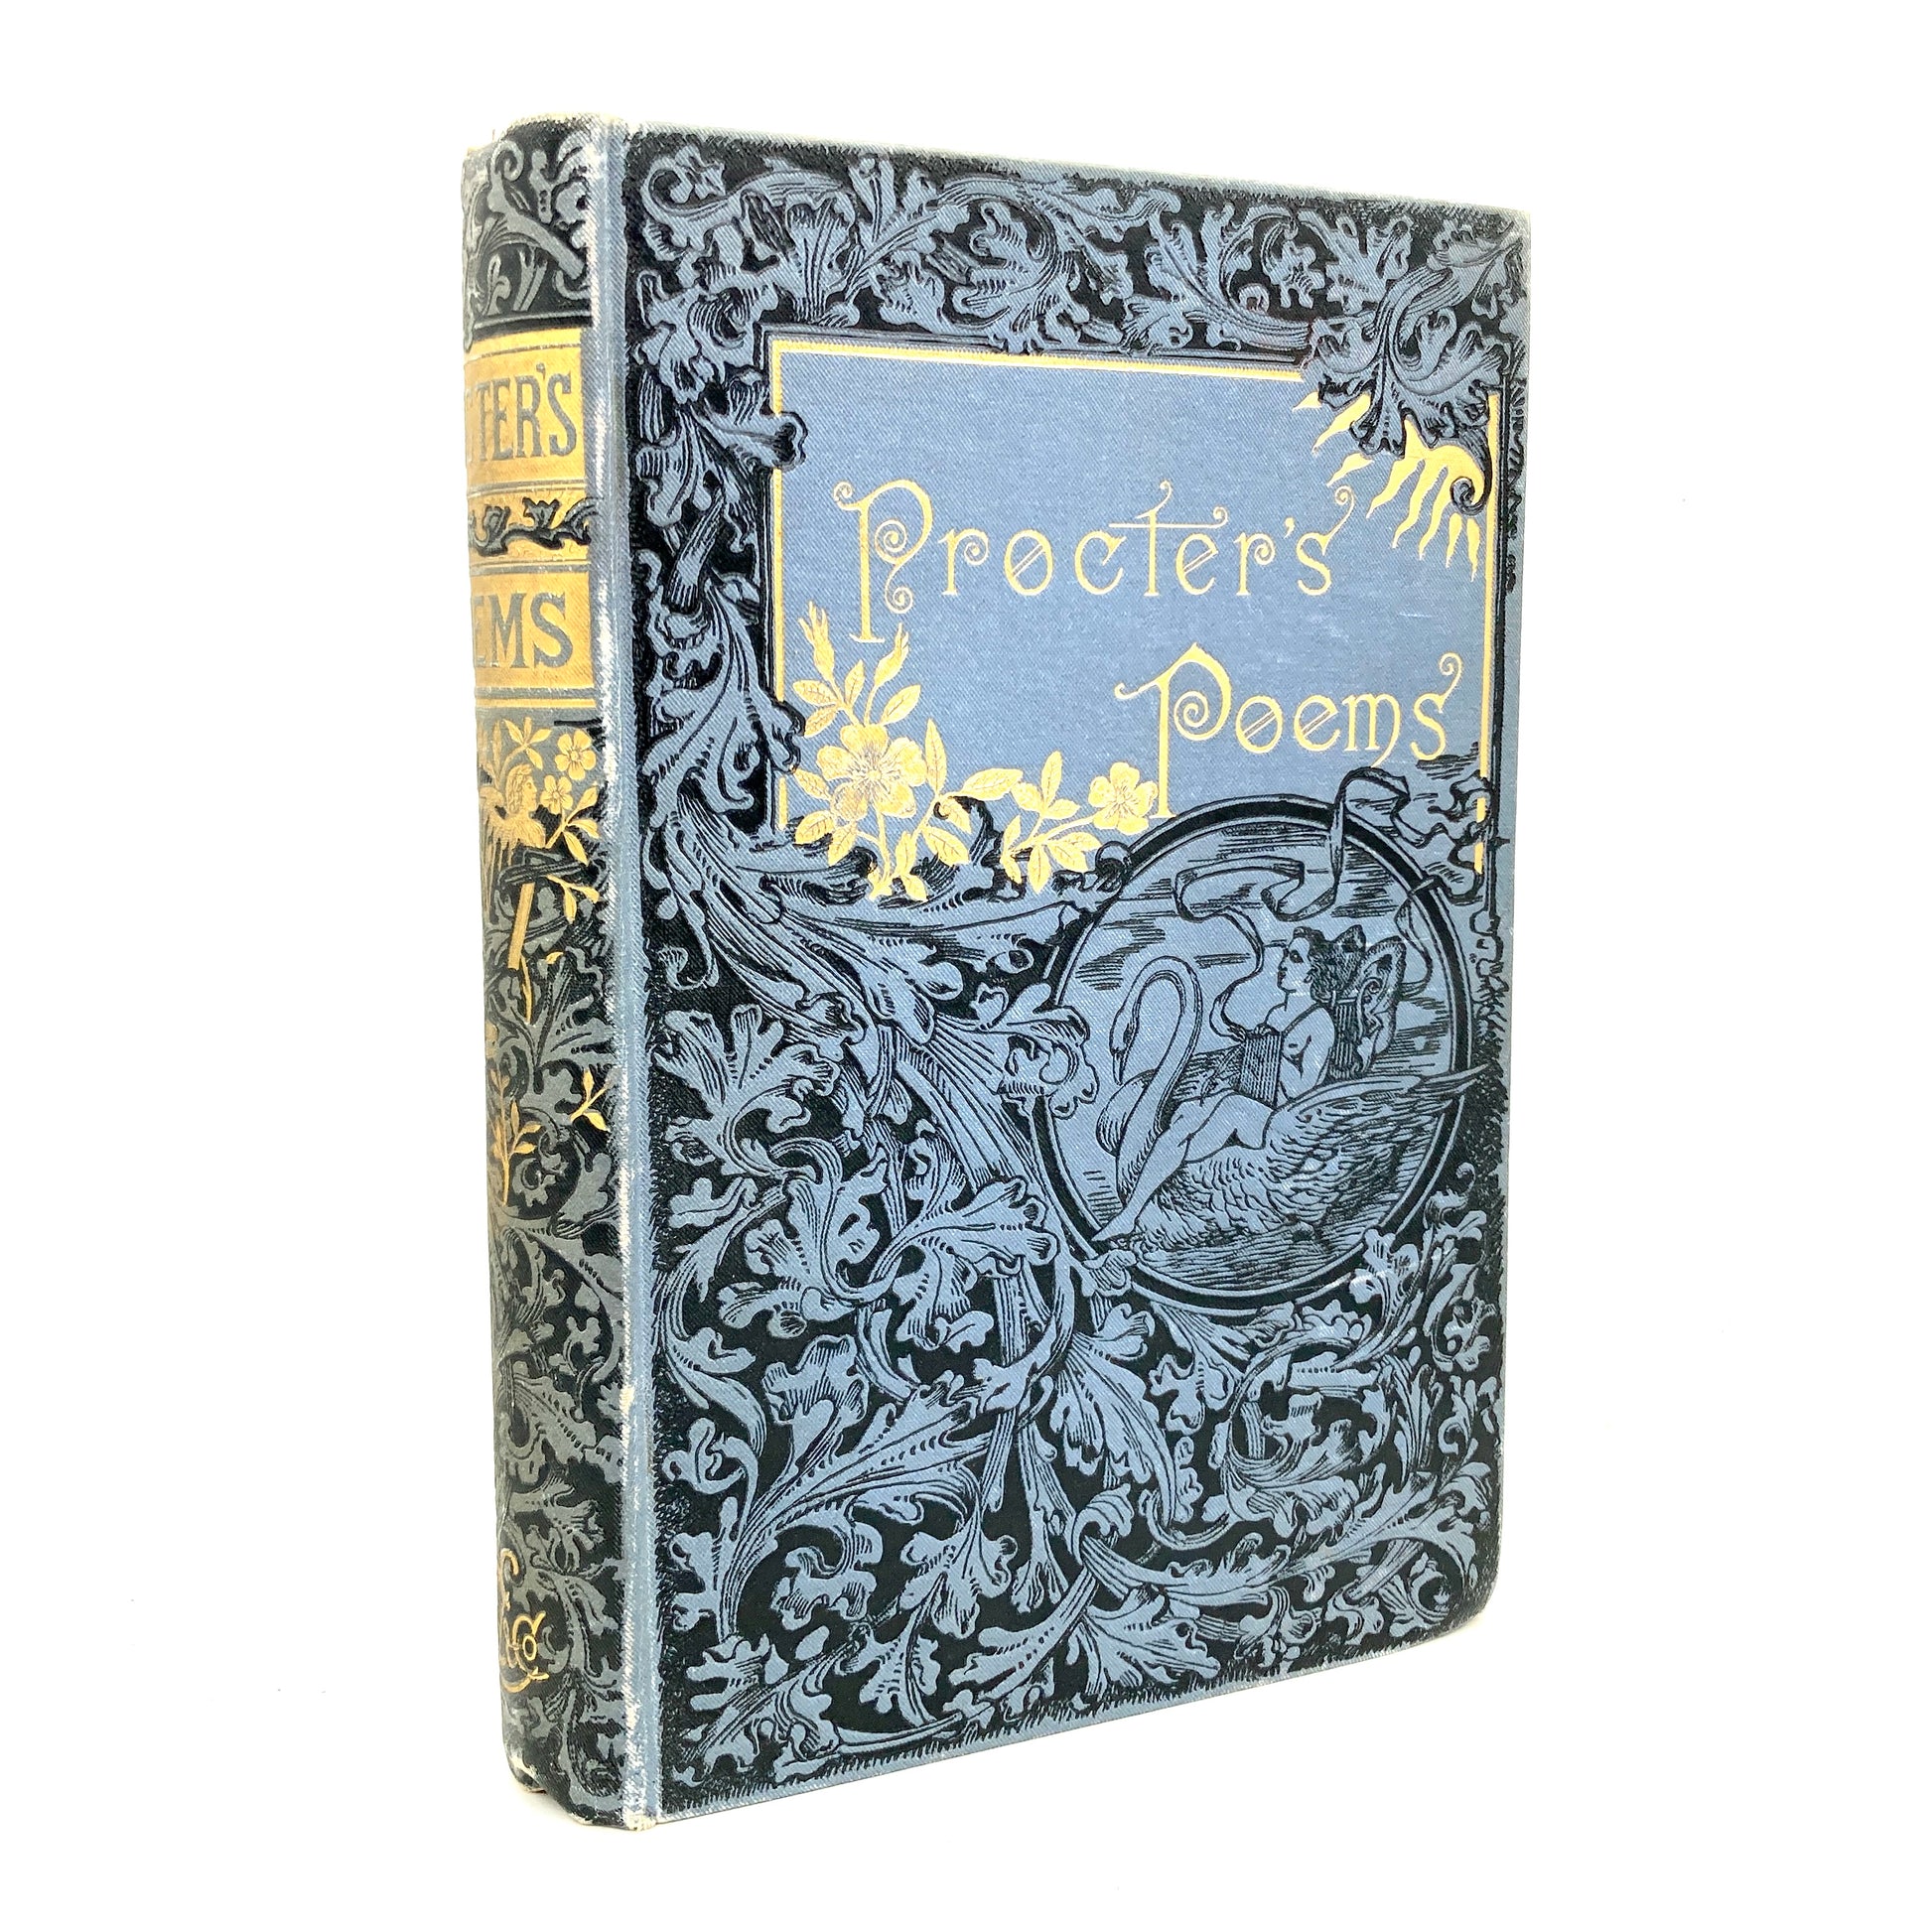 PROCTOR, Adelaide "The Poems of Adelaide Proctor" [Thomas Y. Crowell, c1880] - Buzz Bookstore